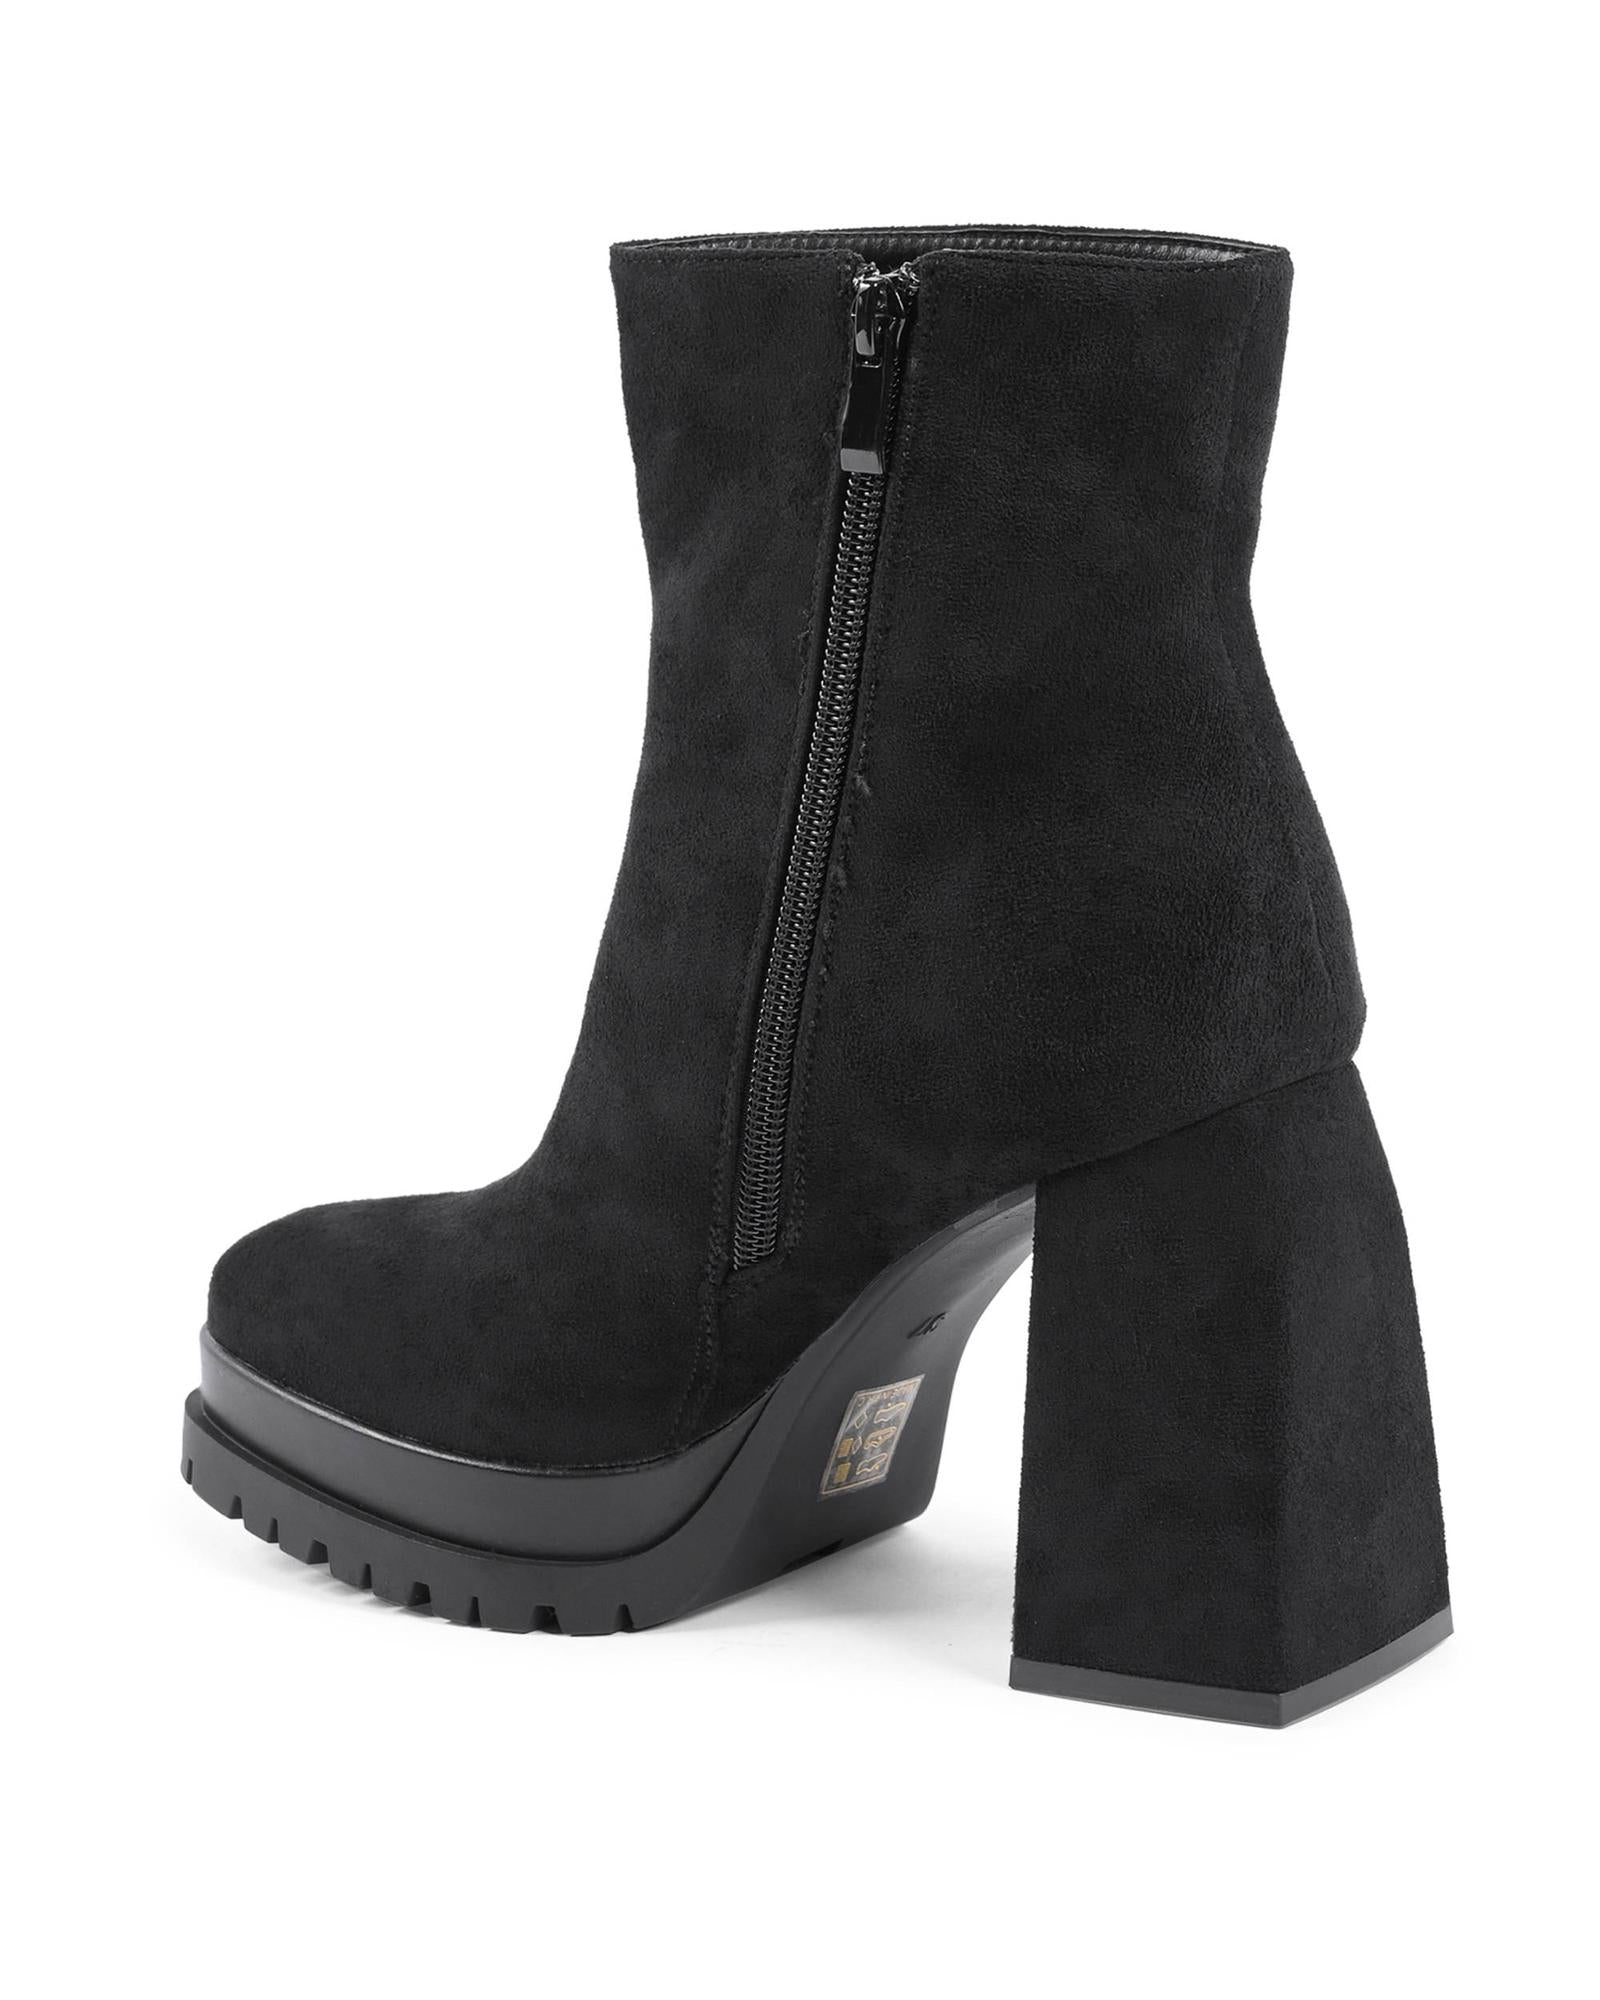 Ankle Boot with 10 cm Heel - 38 EU